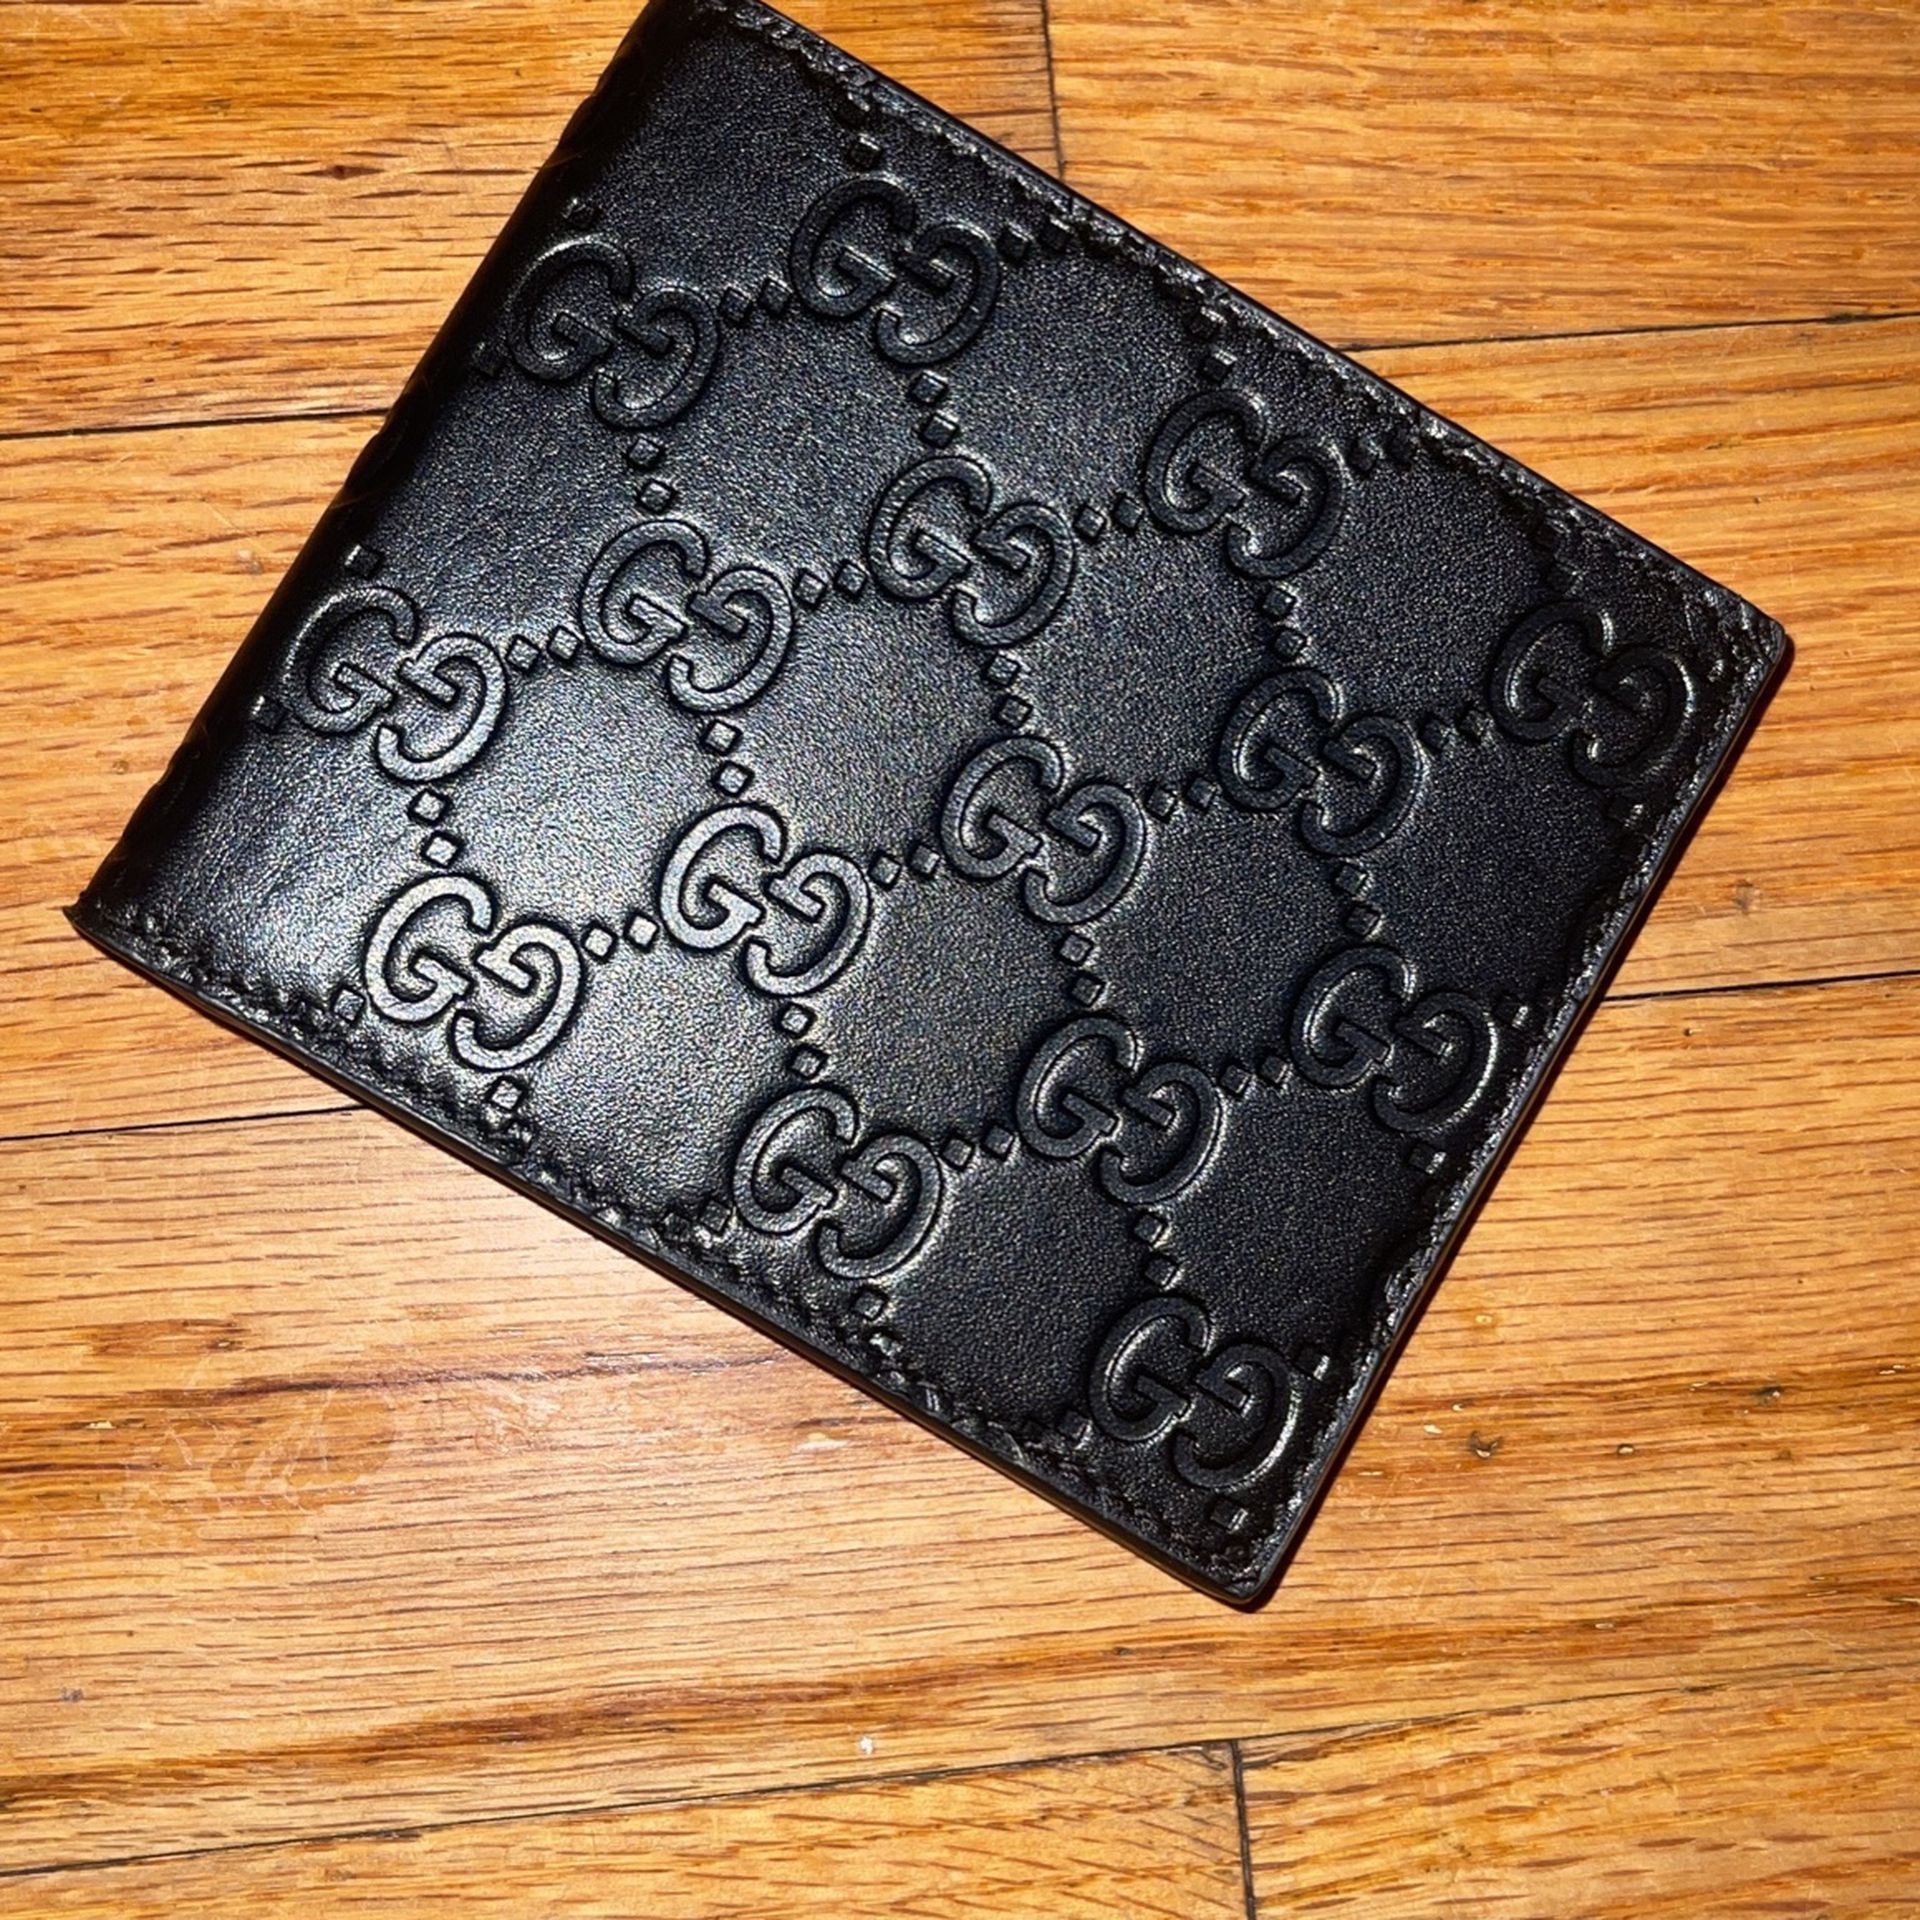 All Black Leather Gucci Wallet